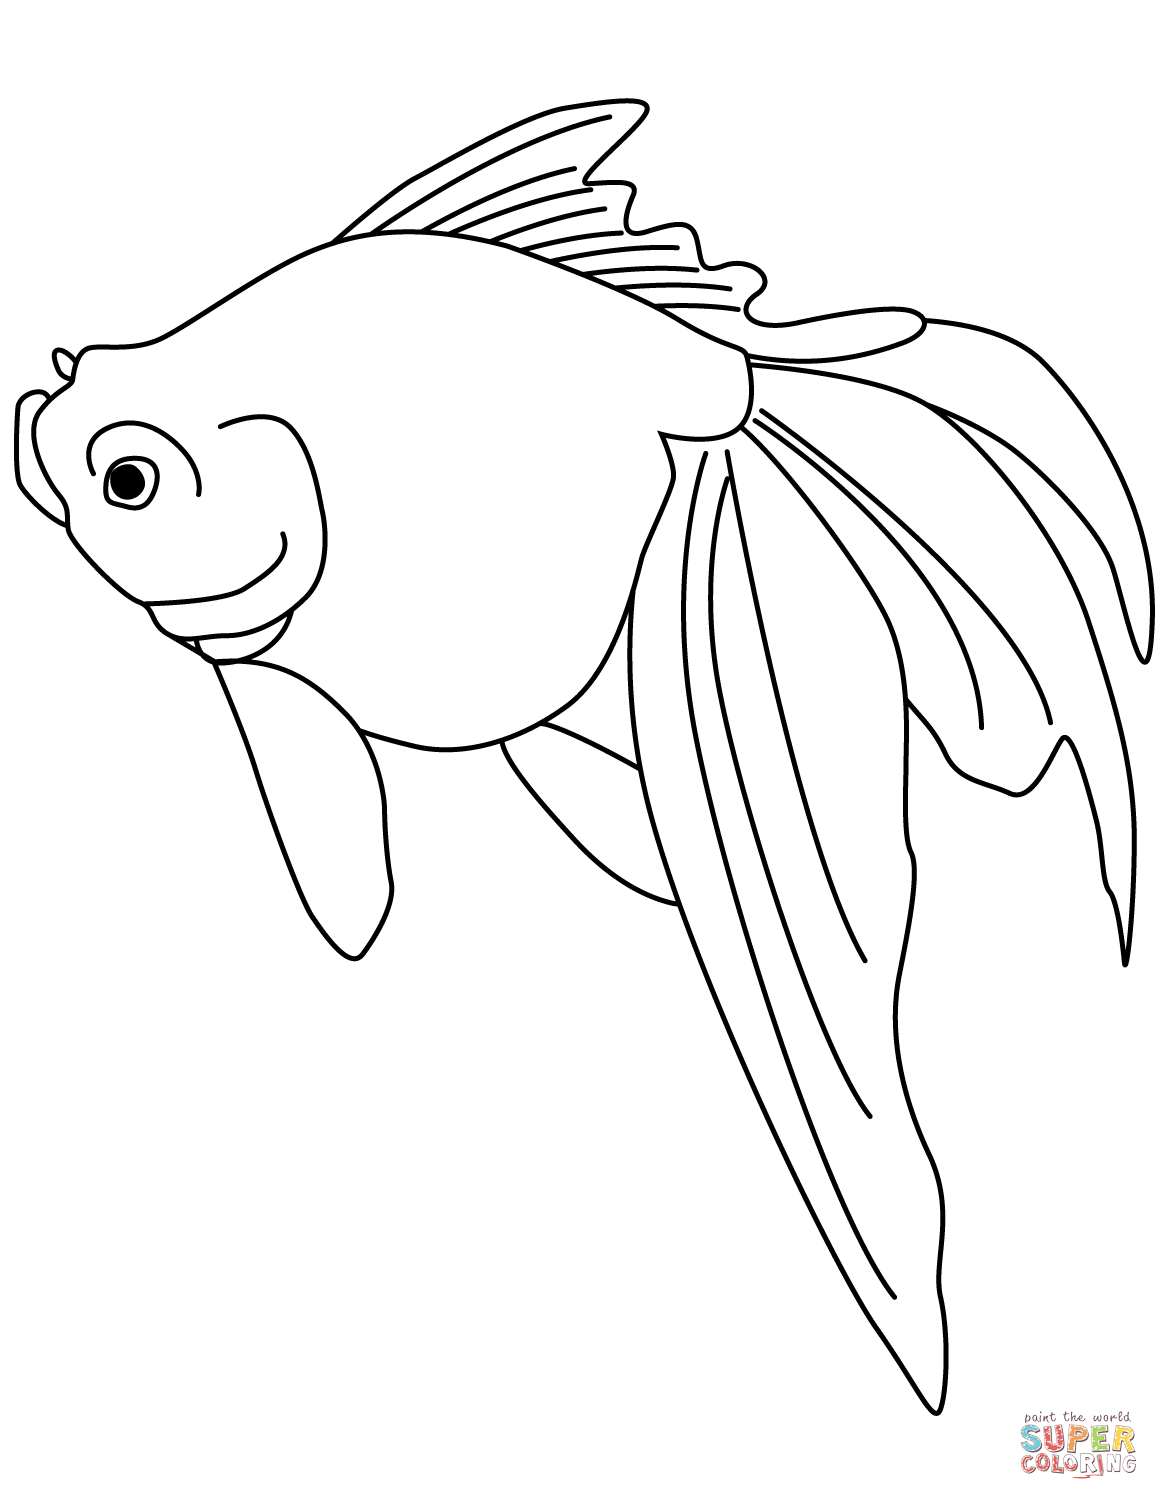 Easy Simple Goldfish Coloring Page